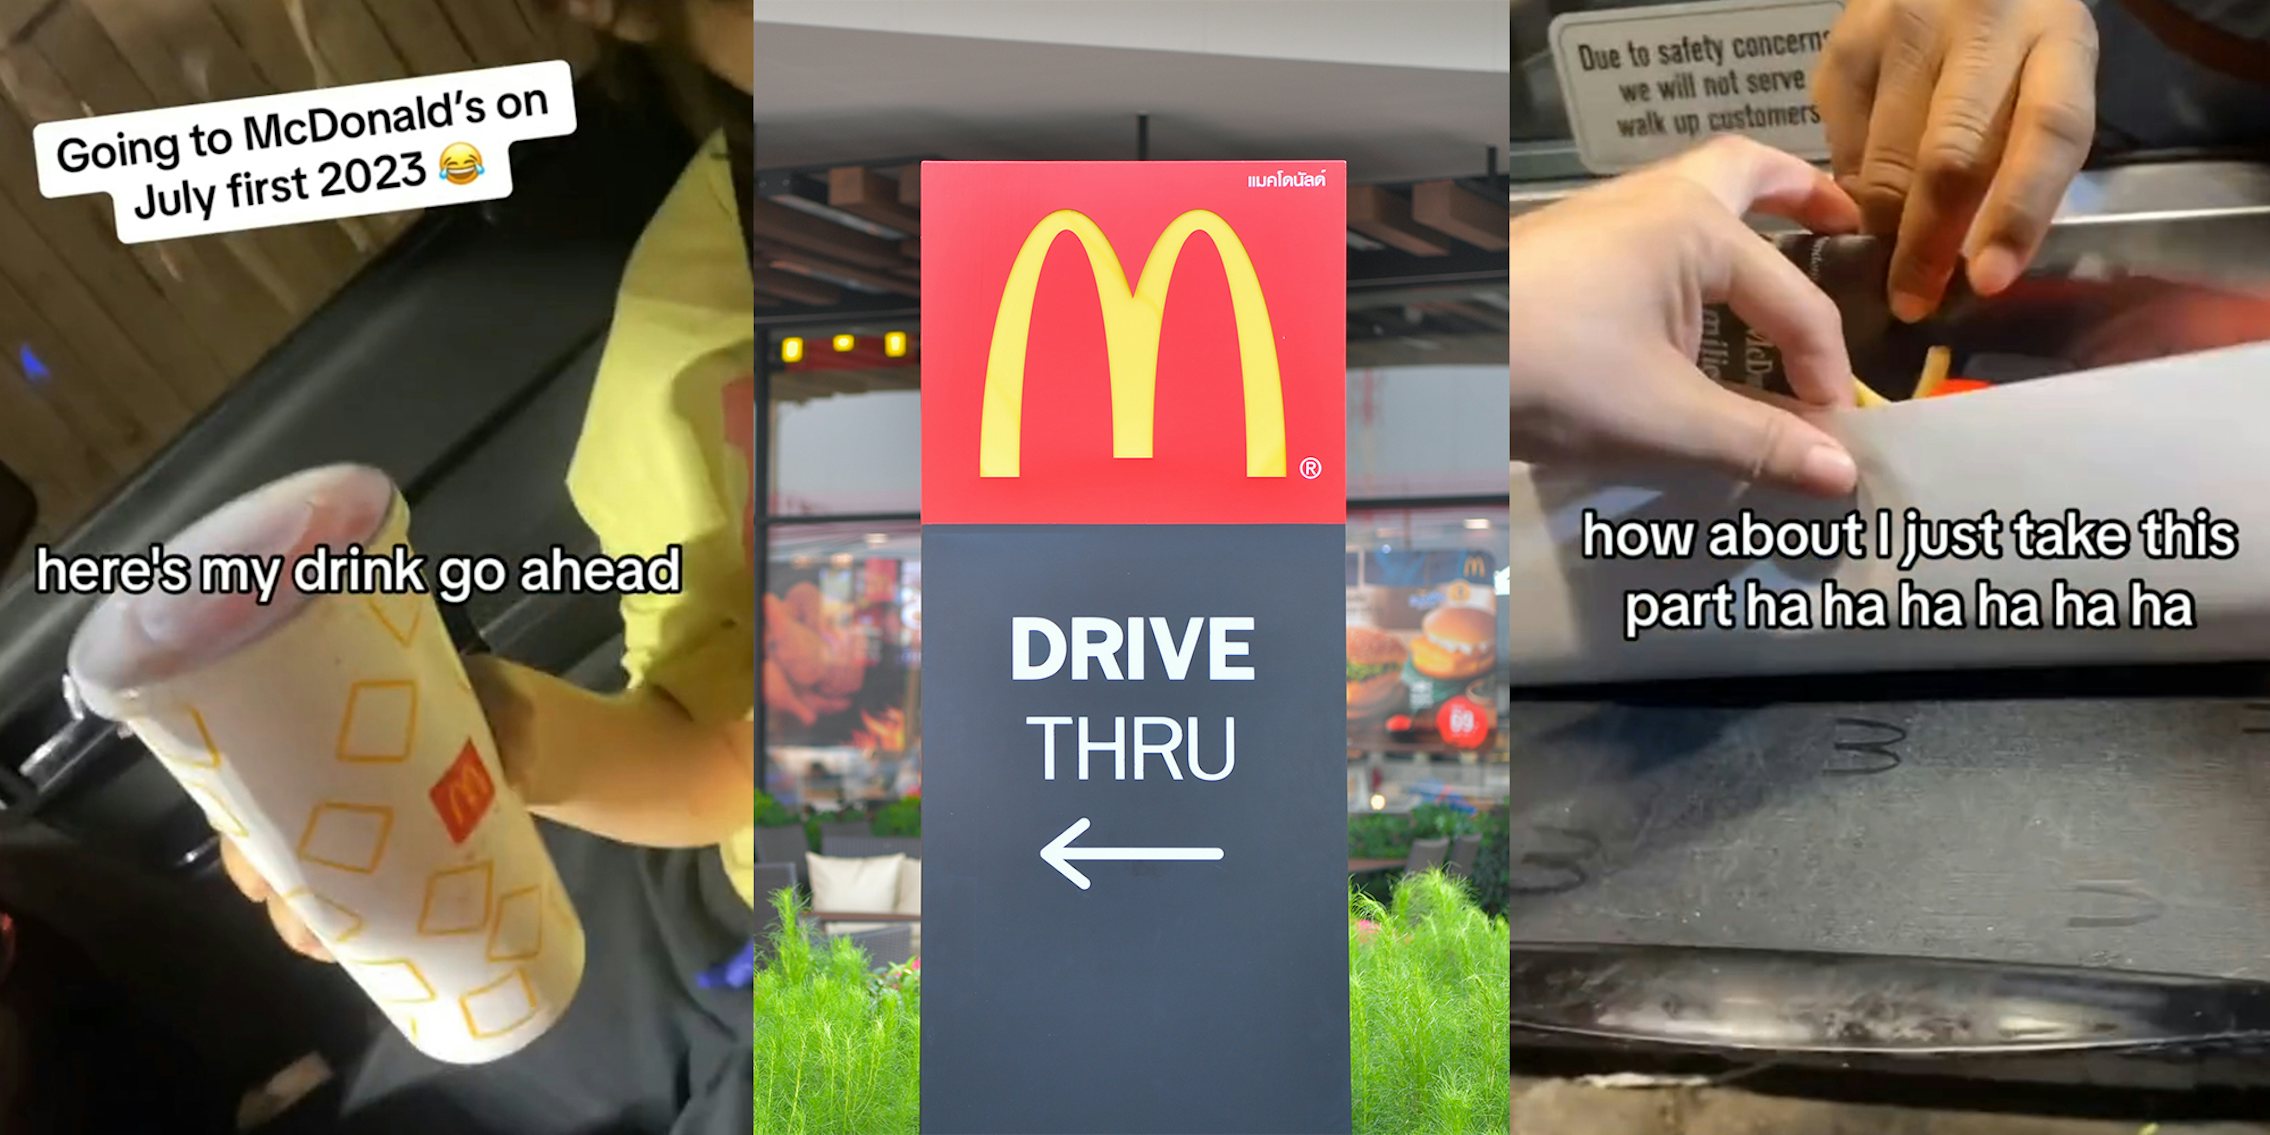 McDonald's drive-thru worker hands customer's order on a tray after bag fee policy is implemented